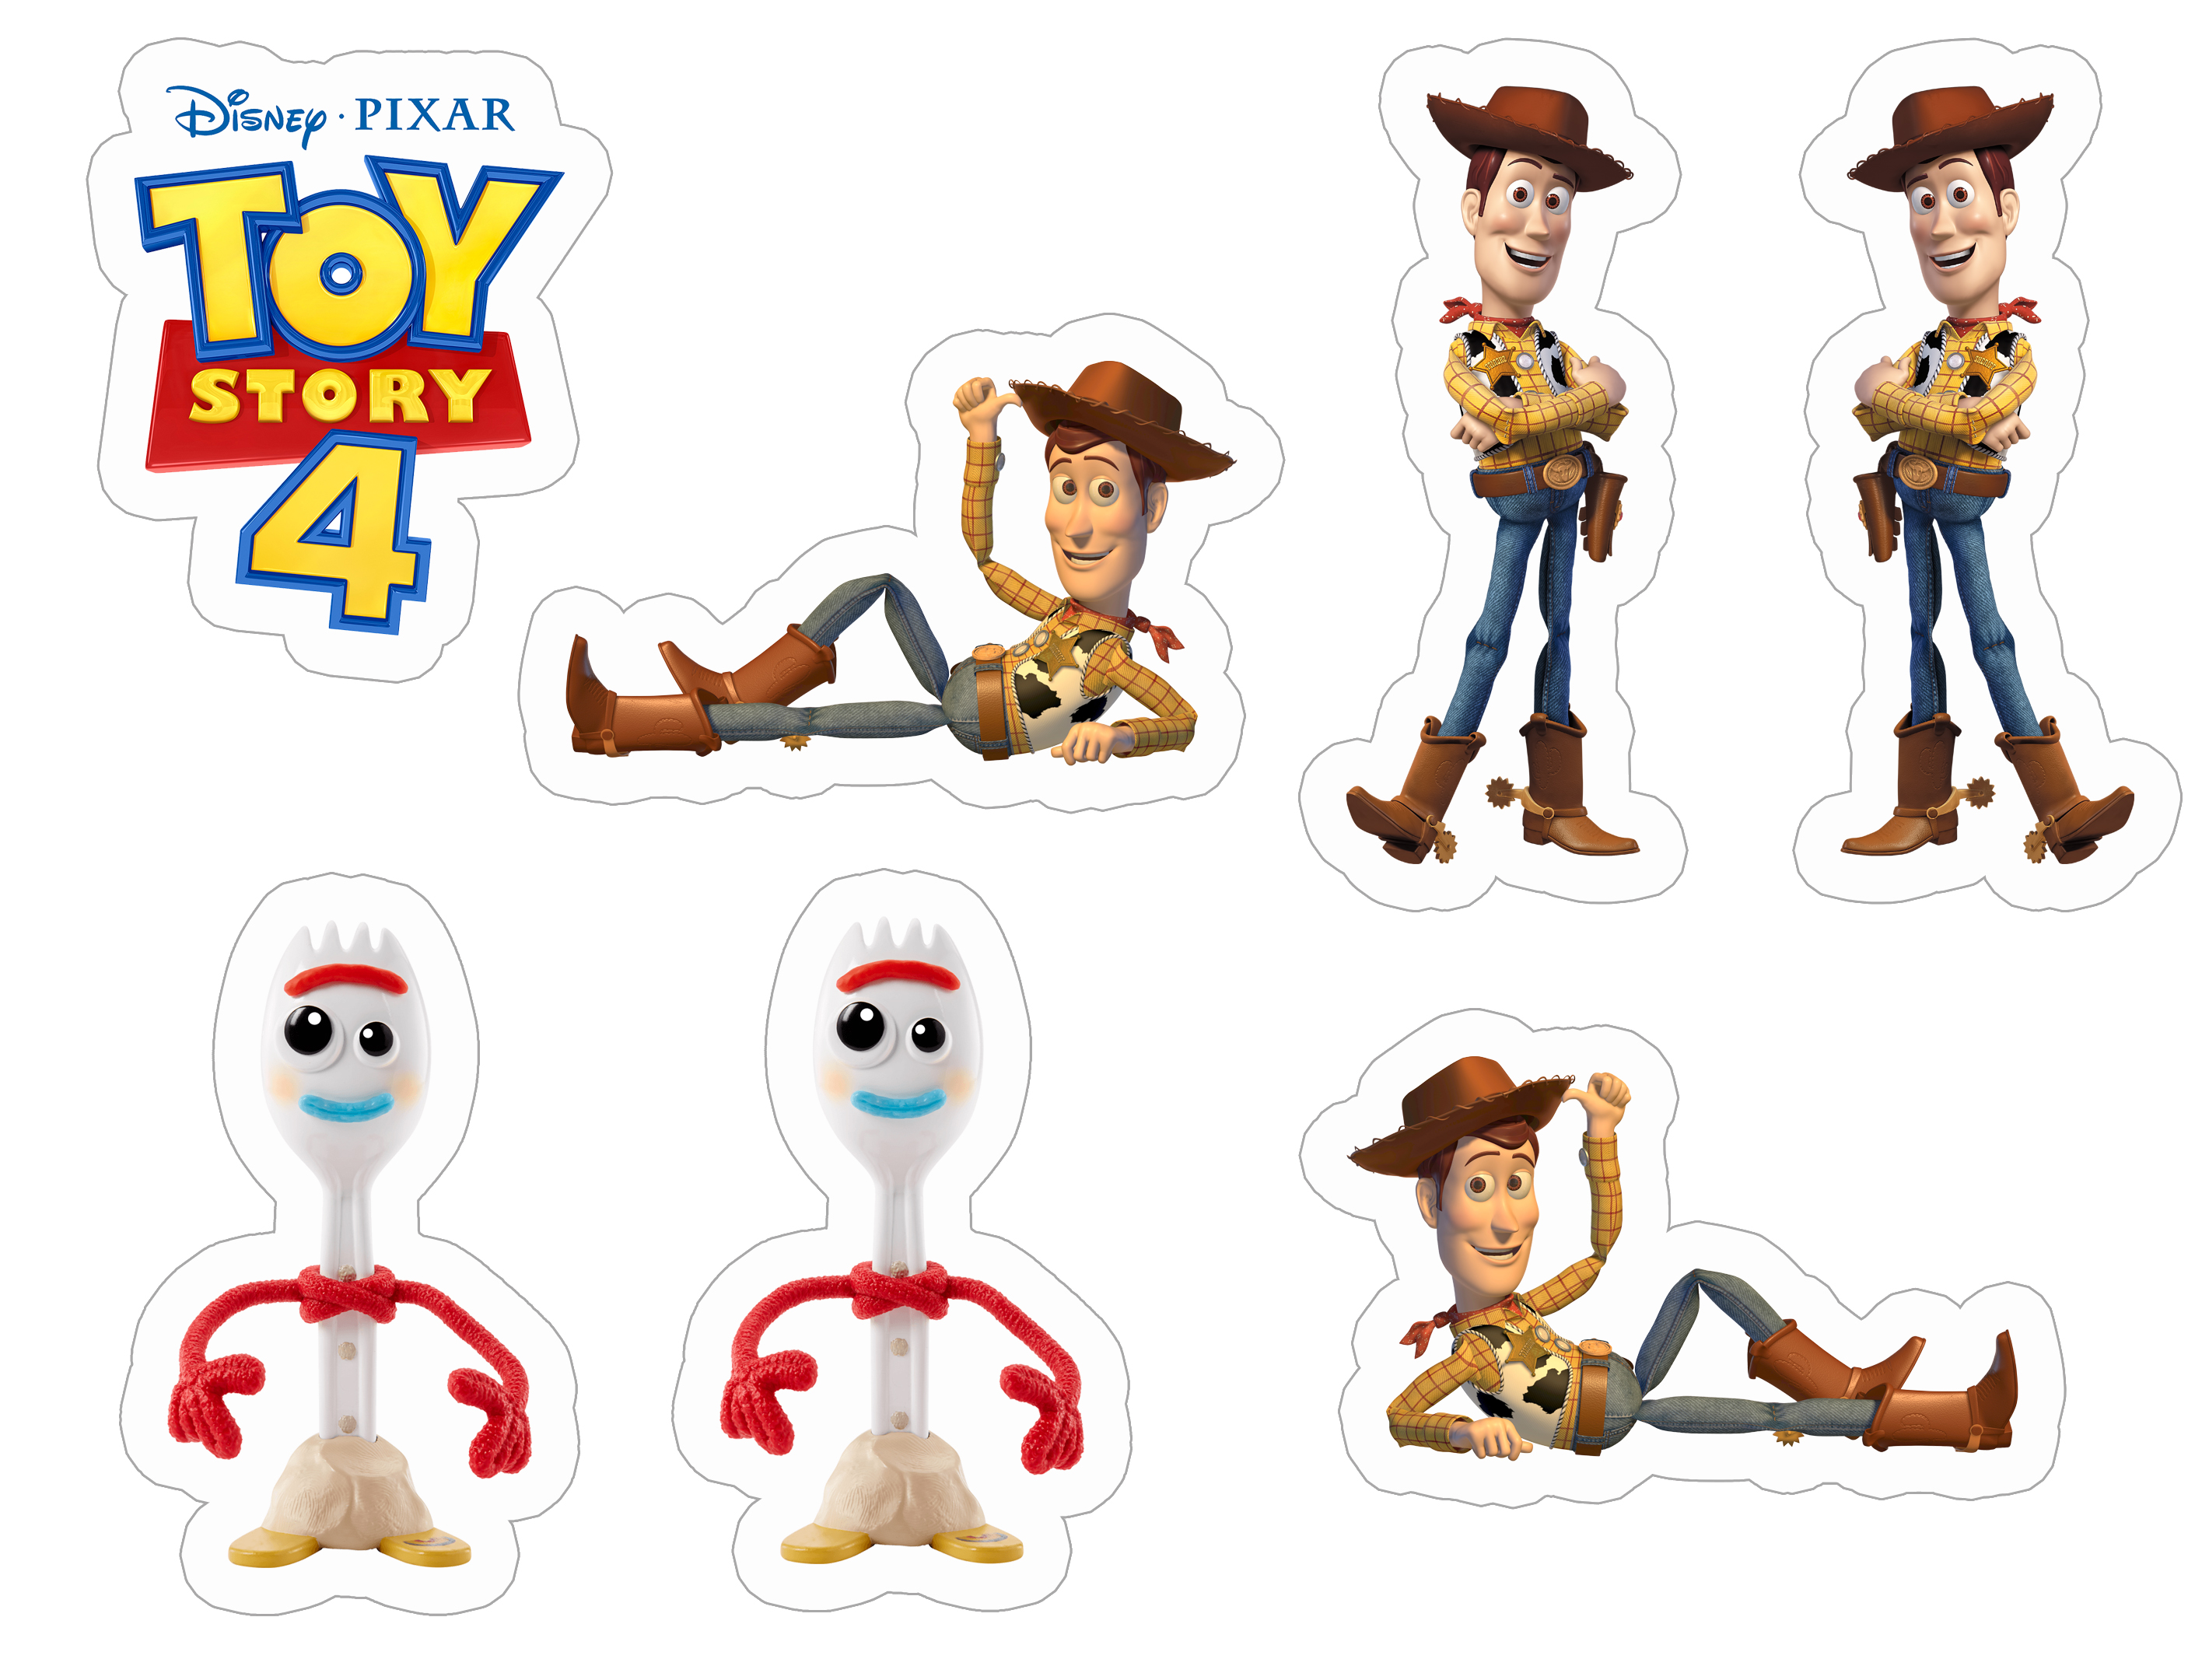 Sheriff Woody and Forky Toy Story 4 free and printable sticker template. Wallpaper